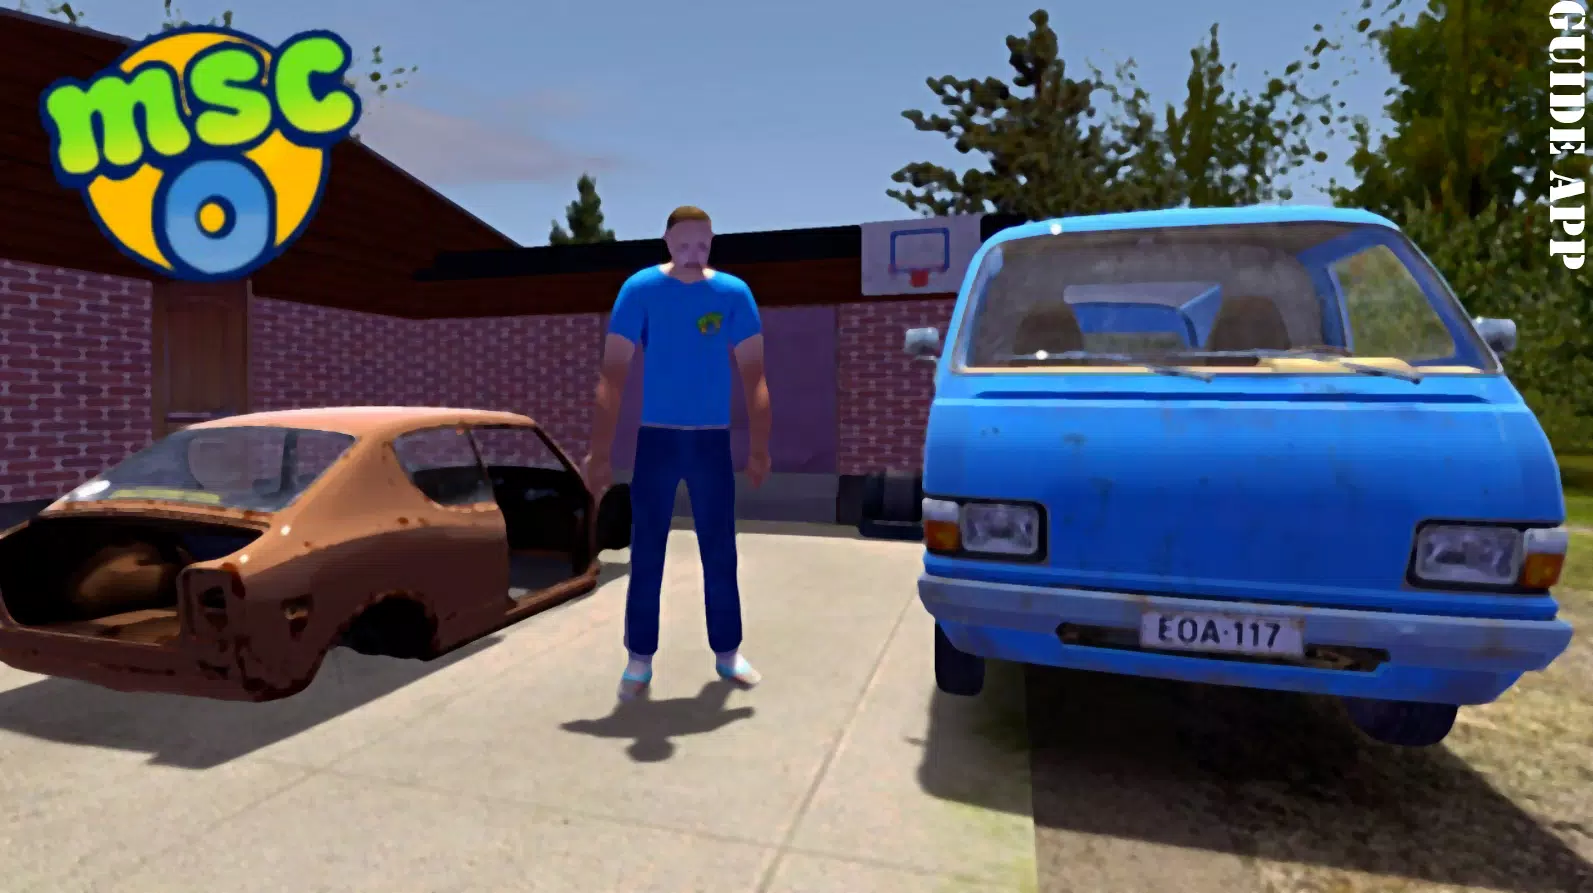 My Summer Cars APK for Android - Download